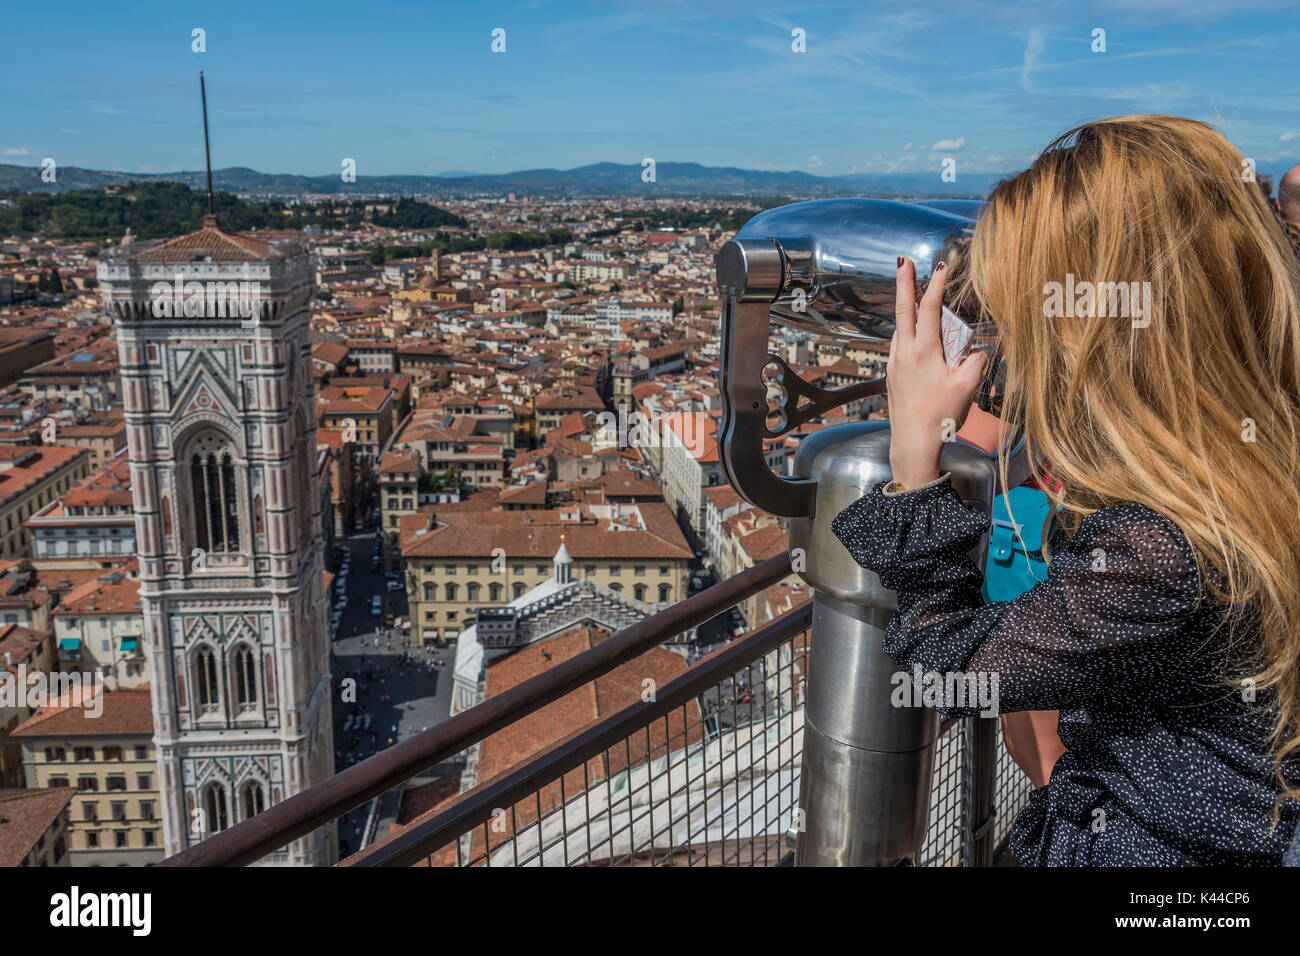 Tuscany, Italy. 4th Sep, 2017. Looking out on the tower from the dome - Tourists enjoy the Cattedrale di Santa Maria del Fiore, the main church of Florence, also known as Il Duomo di Firenze. It was designed by Arnolfo di Cambio and completed with the dome engineered by Filippo Brunelleschi. The cathedral complex is located in Piazza del Duomo, and includes the Baptistery and Giotto's Campanile. Credit: Guy Bell/Alamy Live News Stock Photo